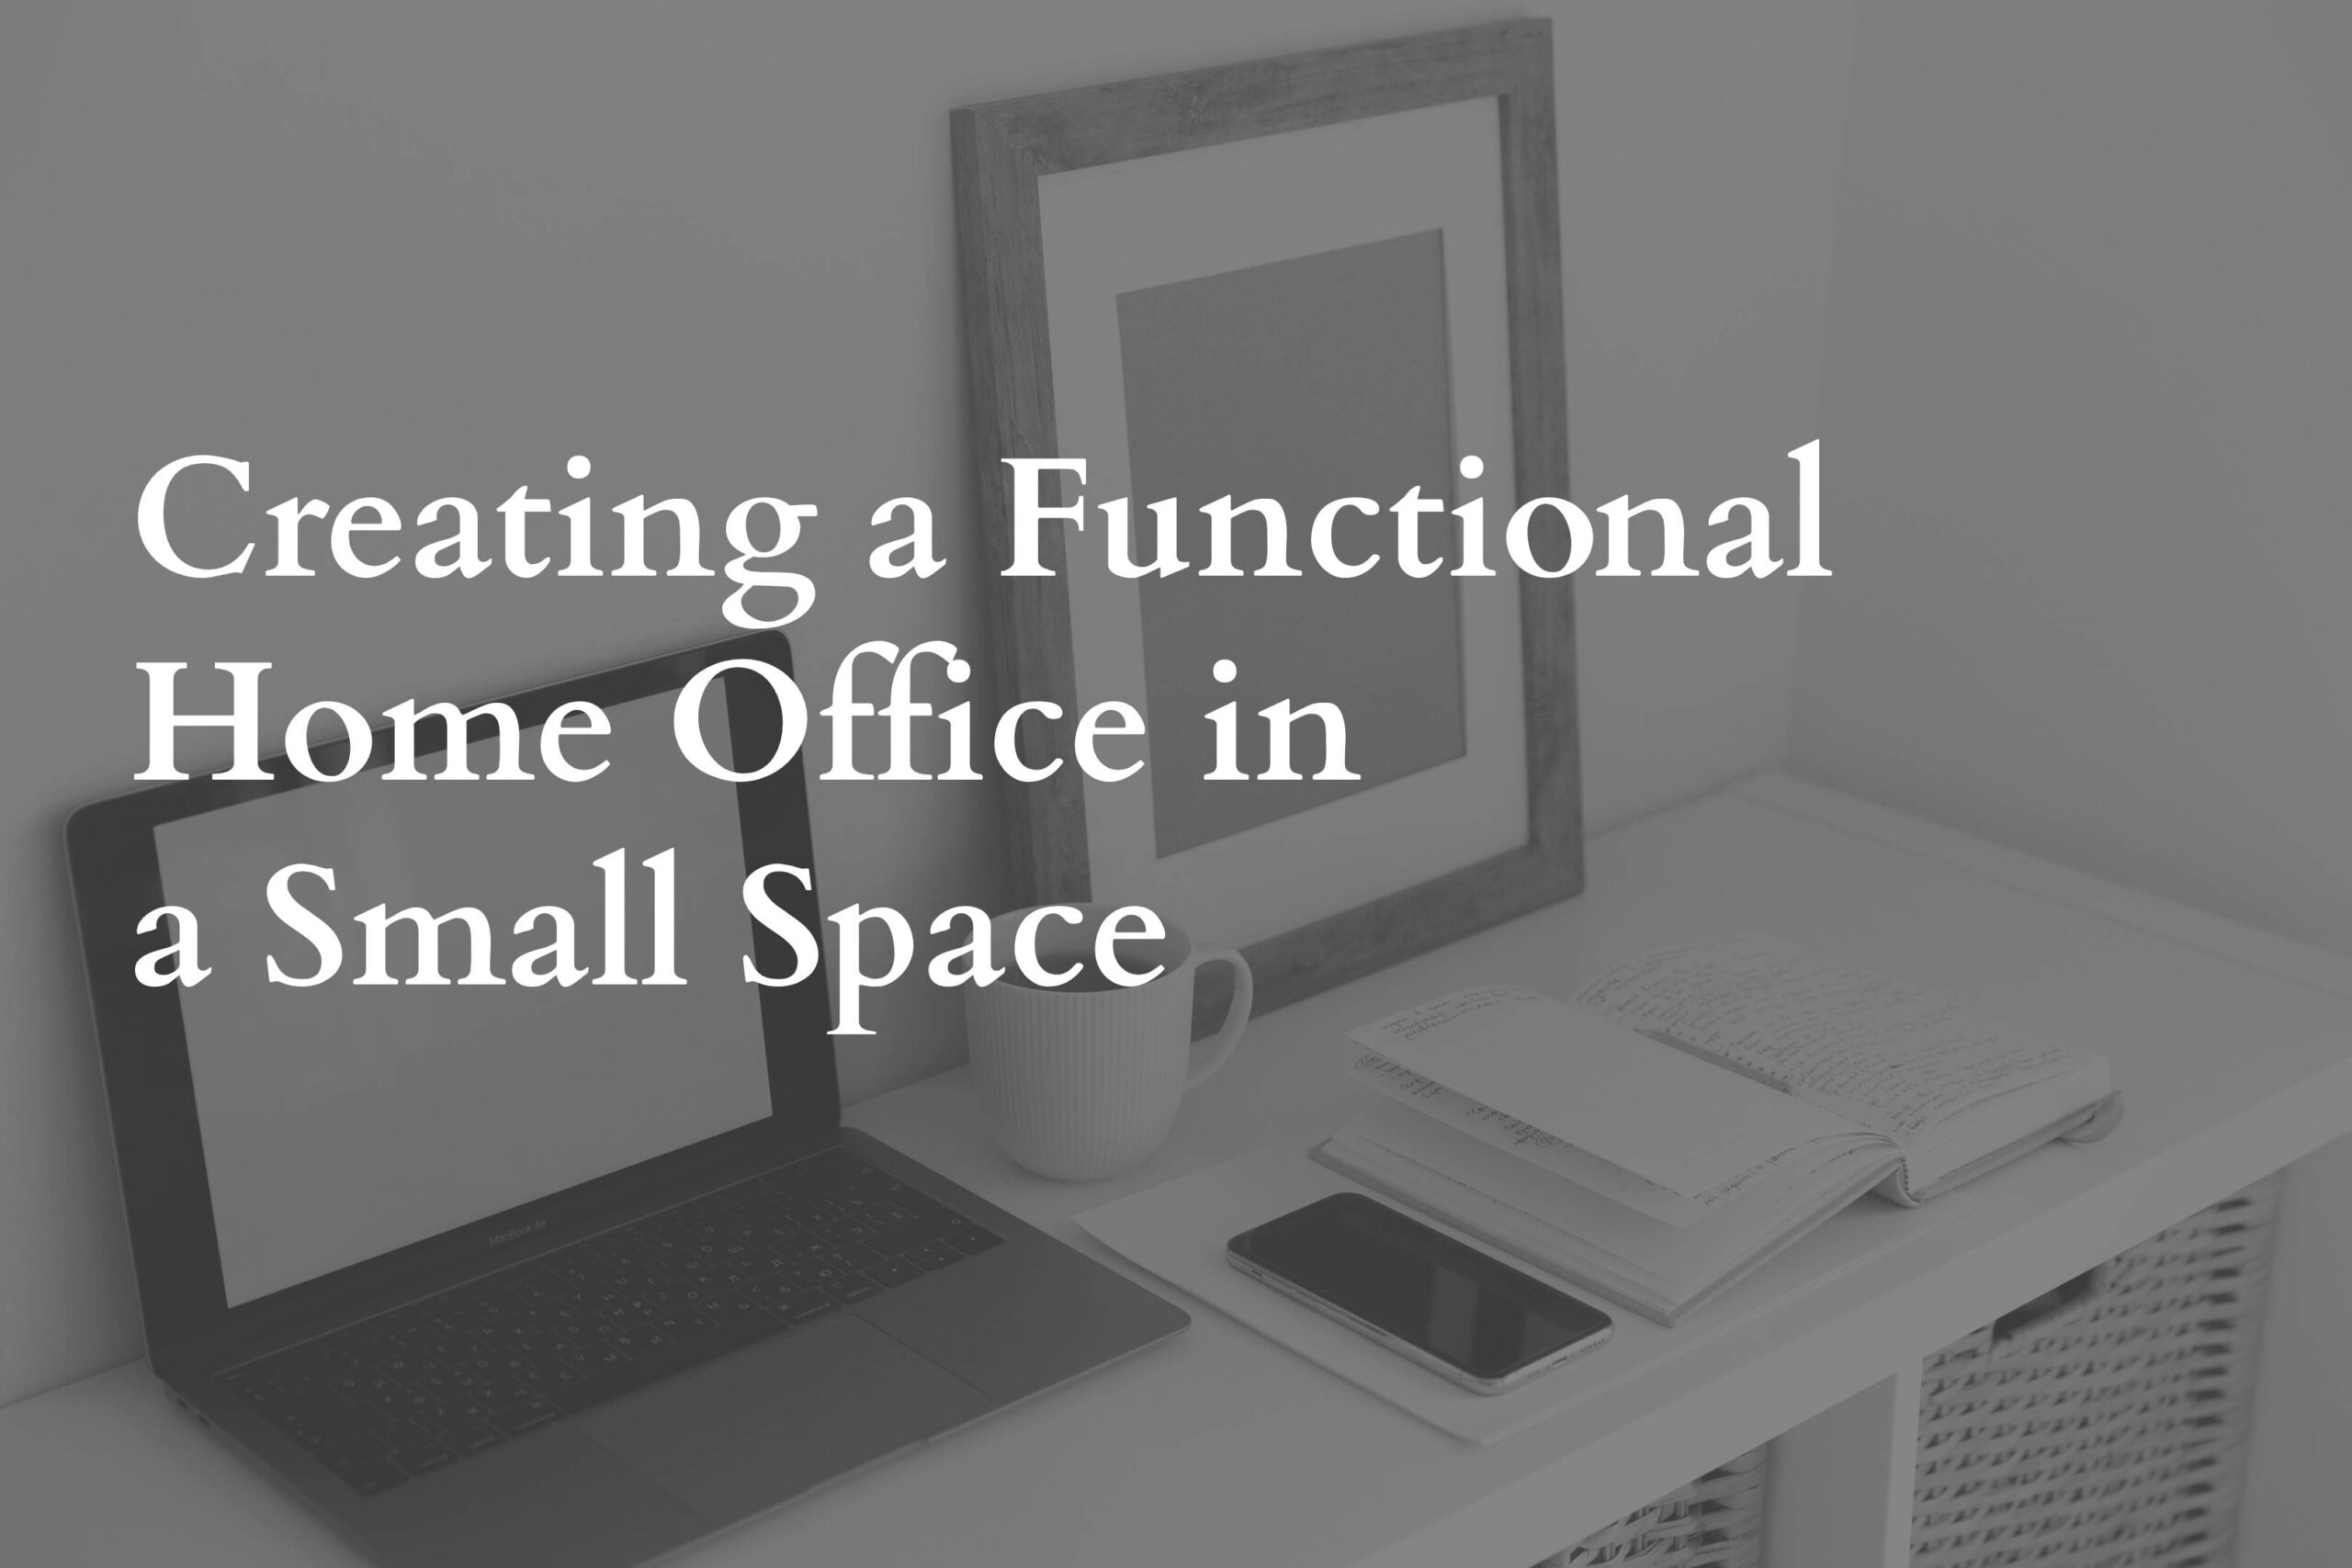 Creating a Functional Home Office in a Small Space